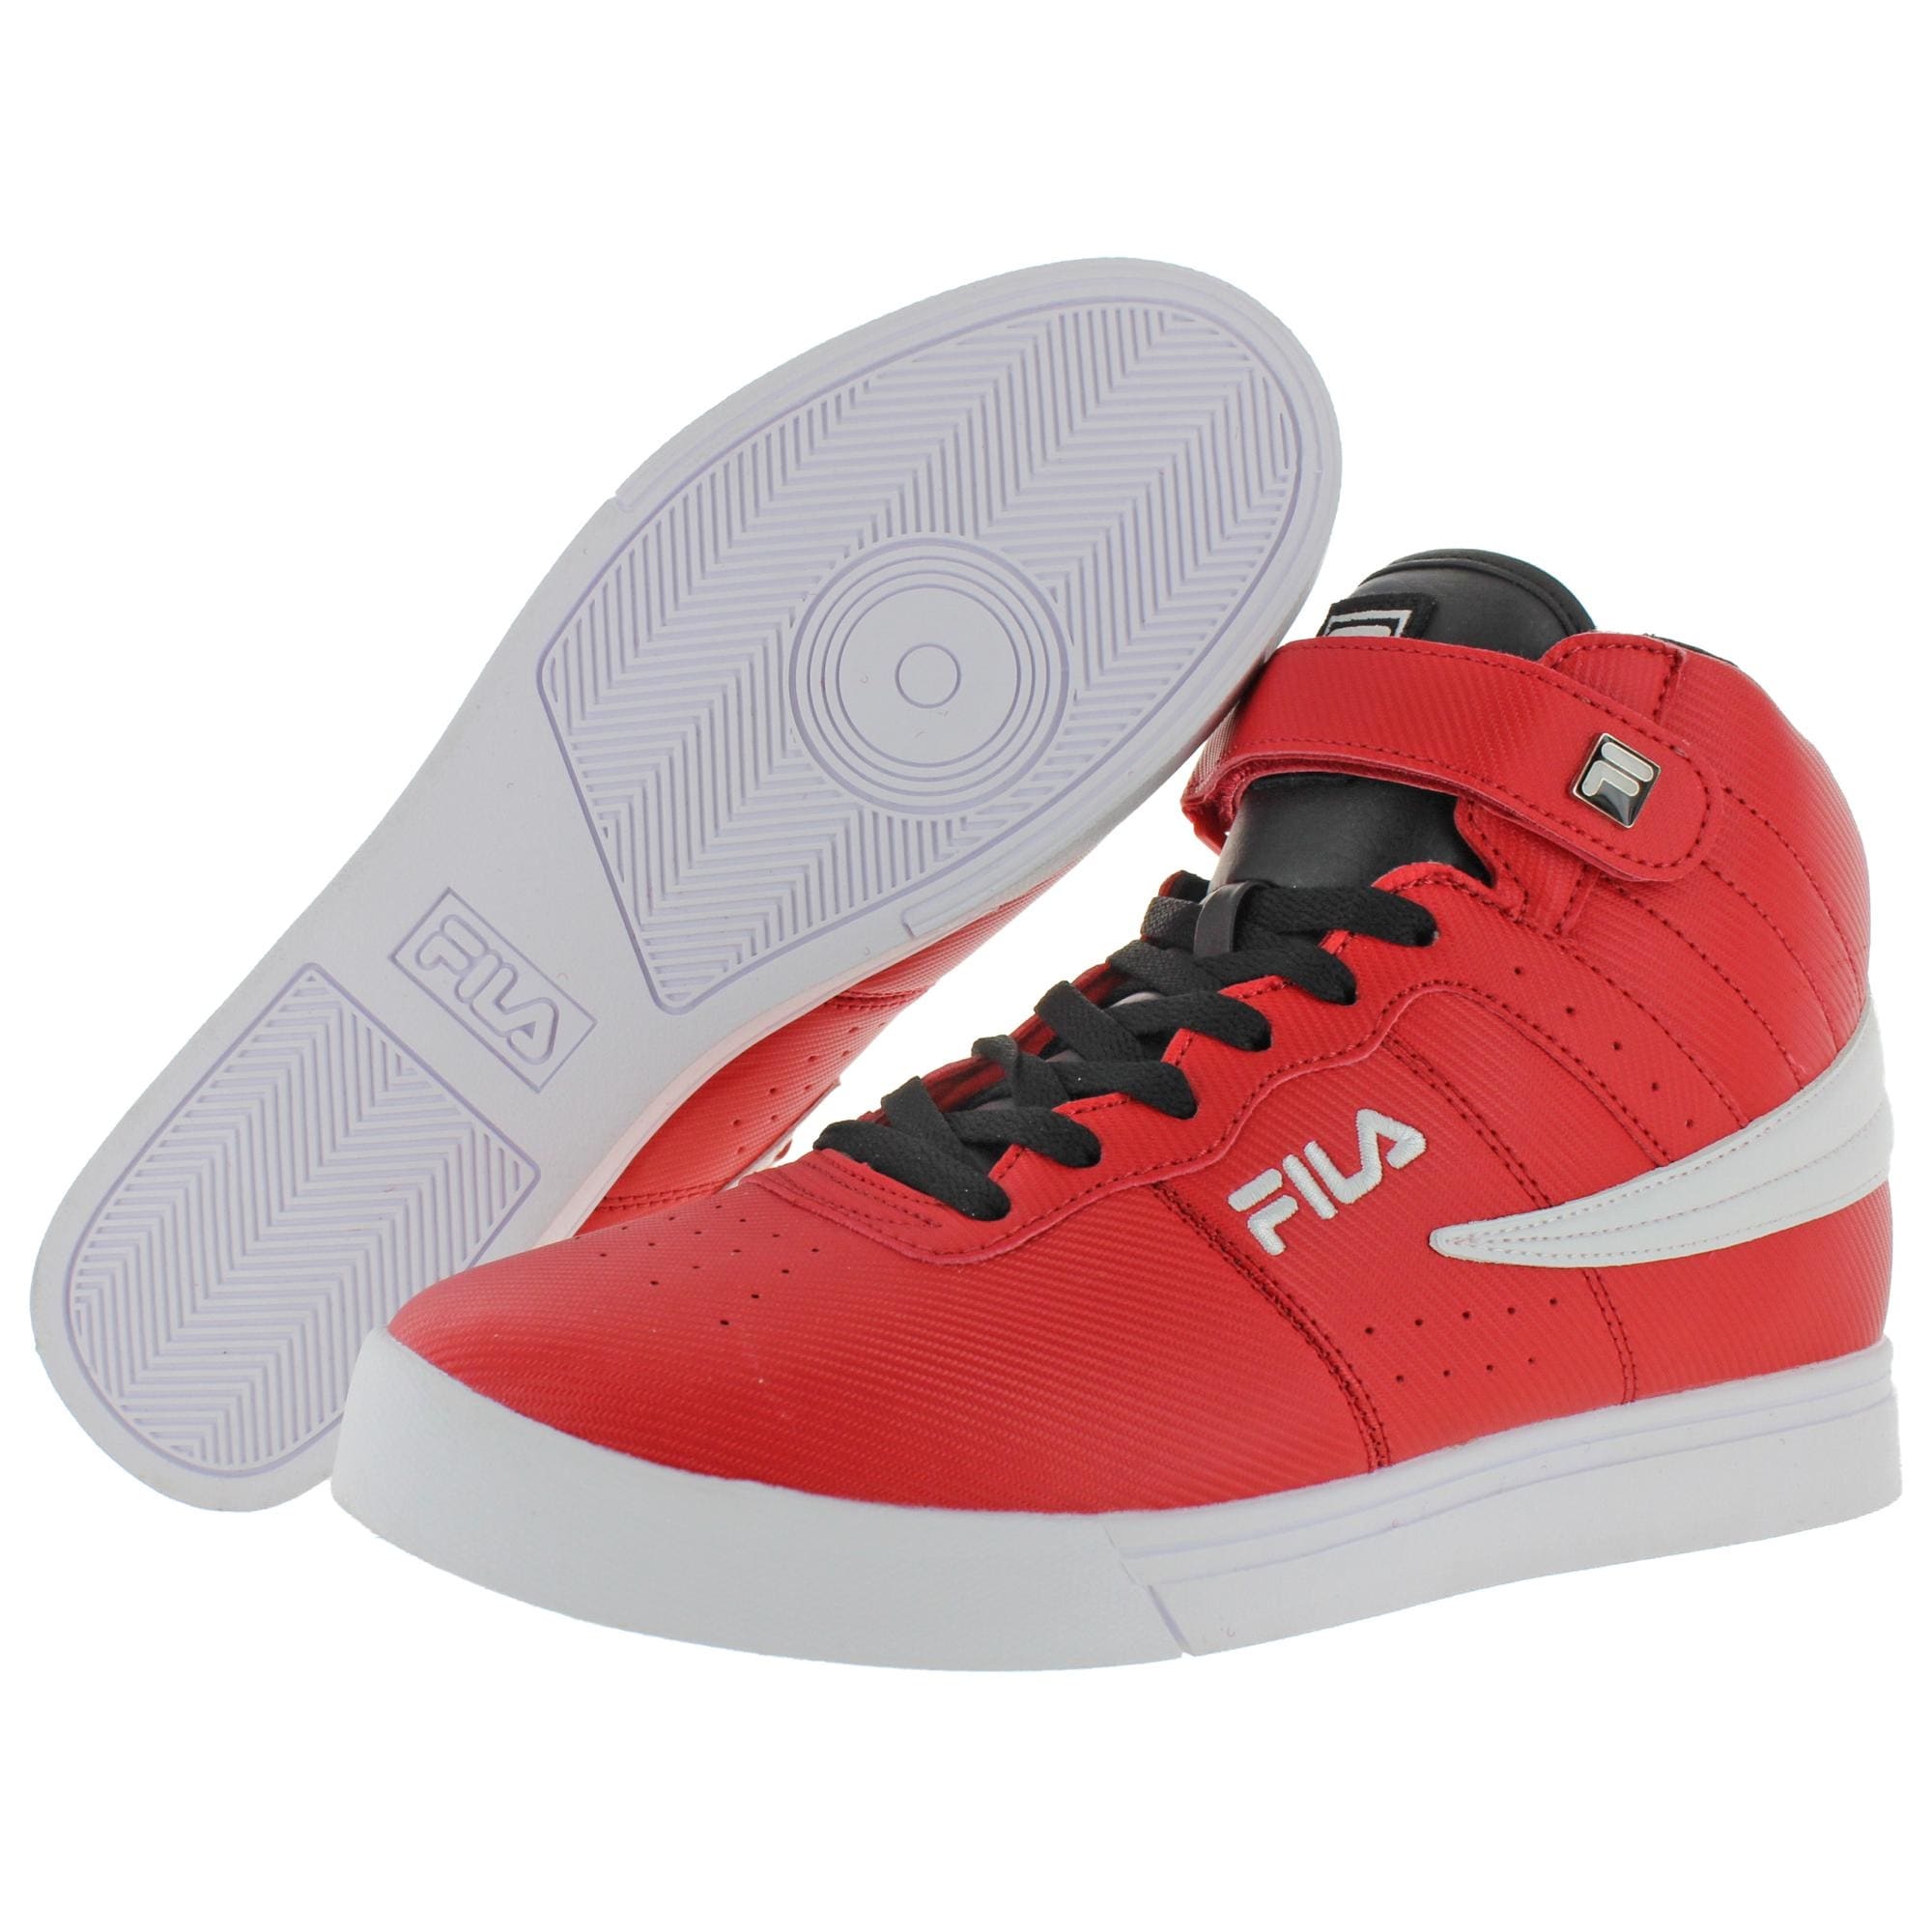 black and red fila